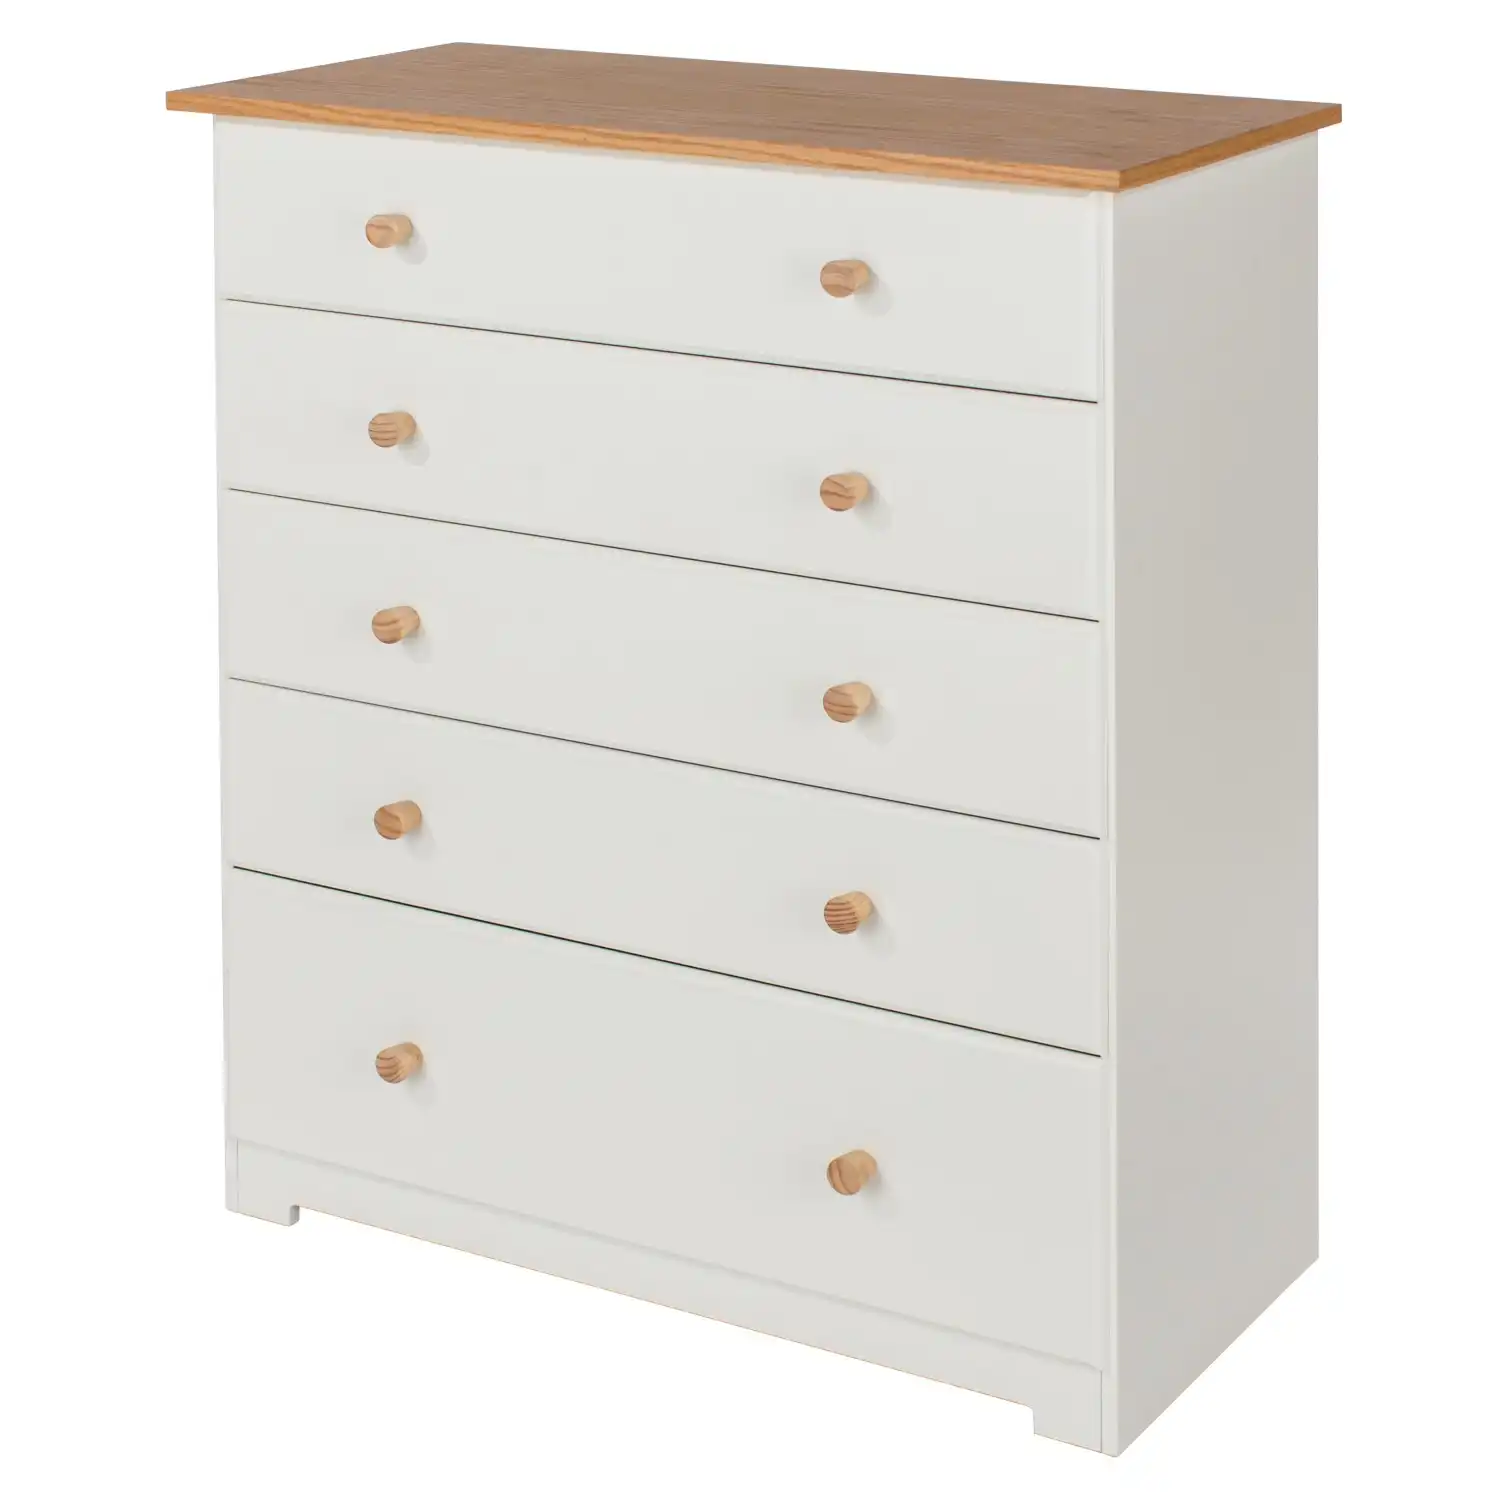 Soft White Painted Oak Top Bedroom Chest of 5 Drawers 80cm Wide